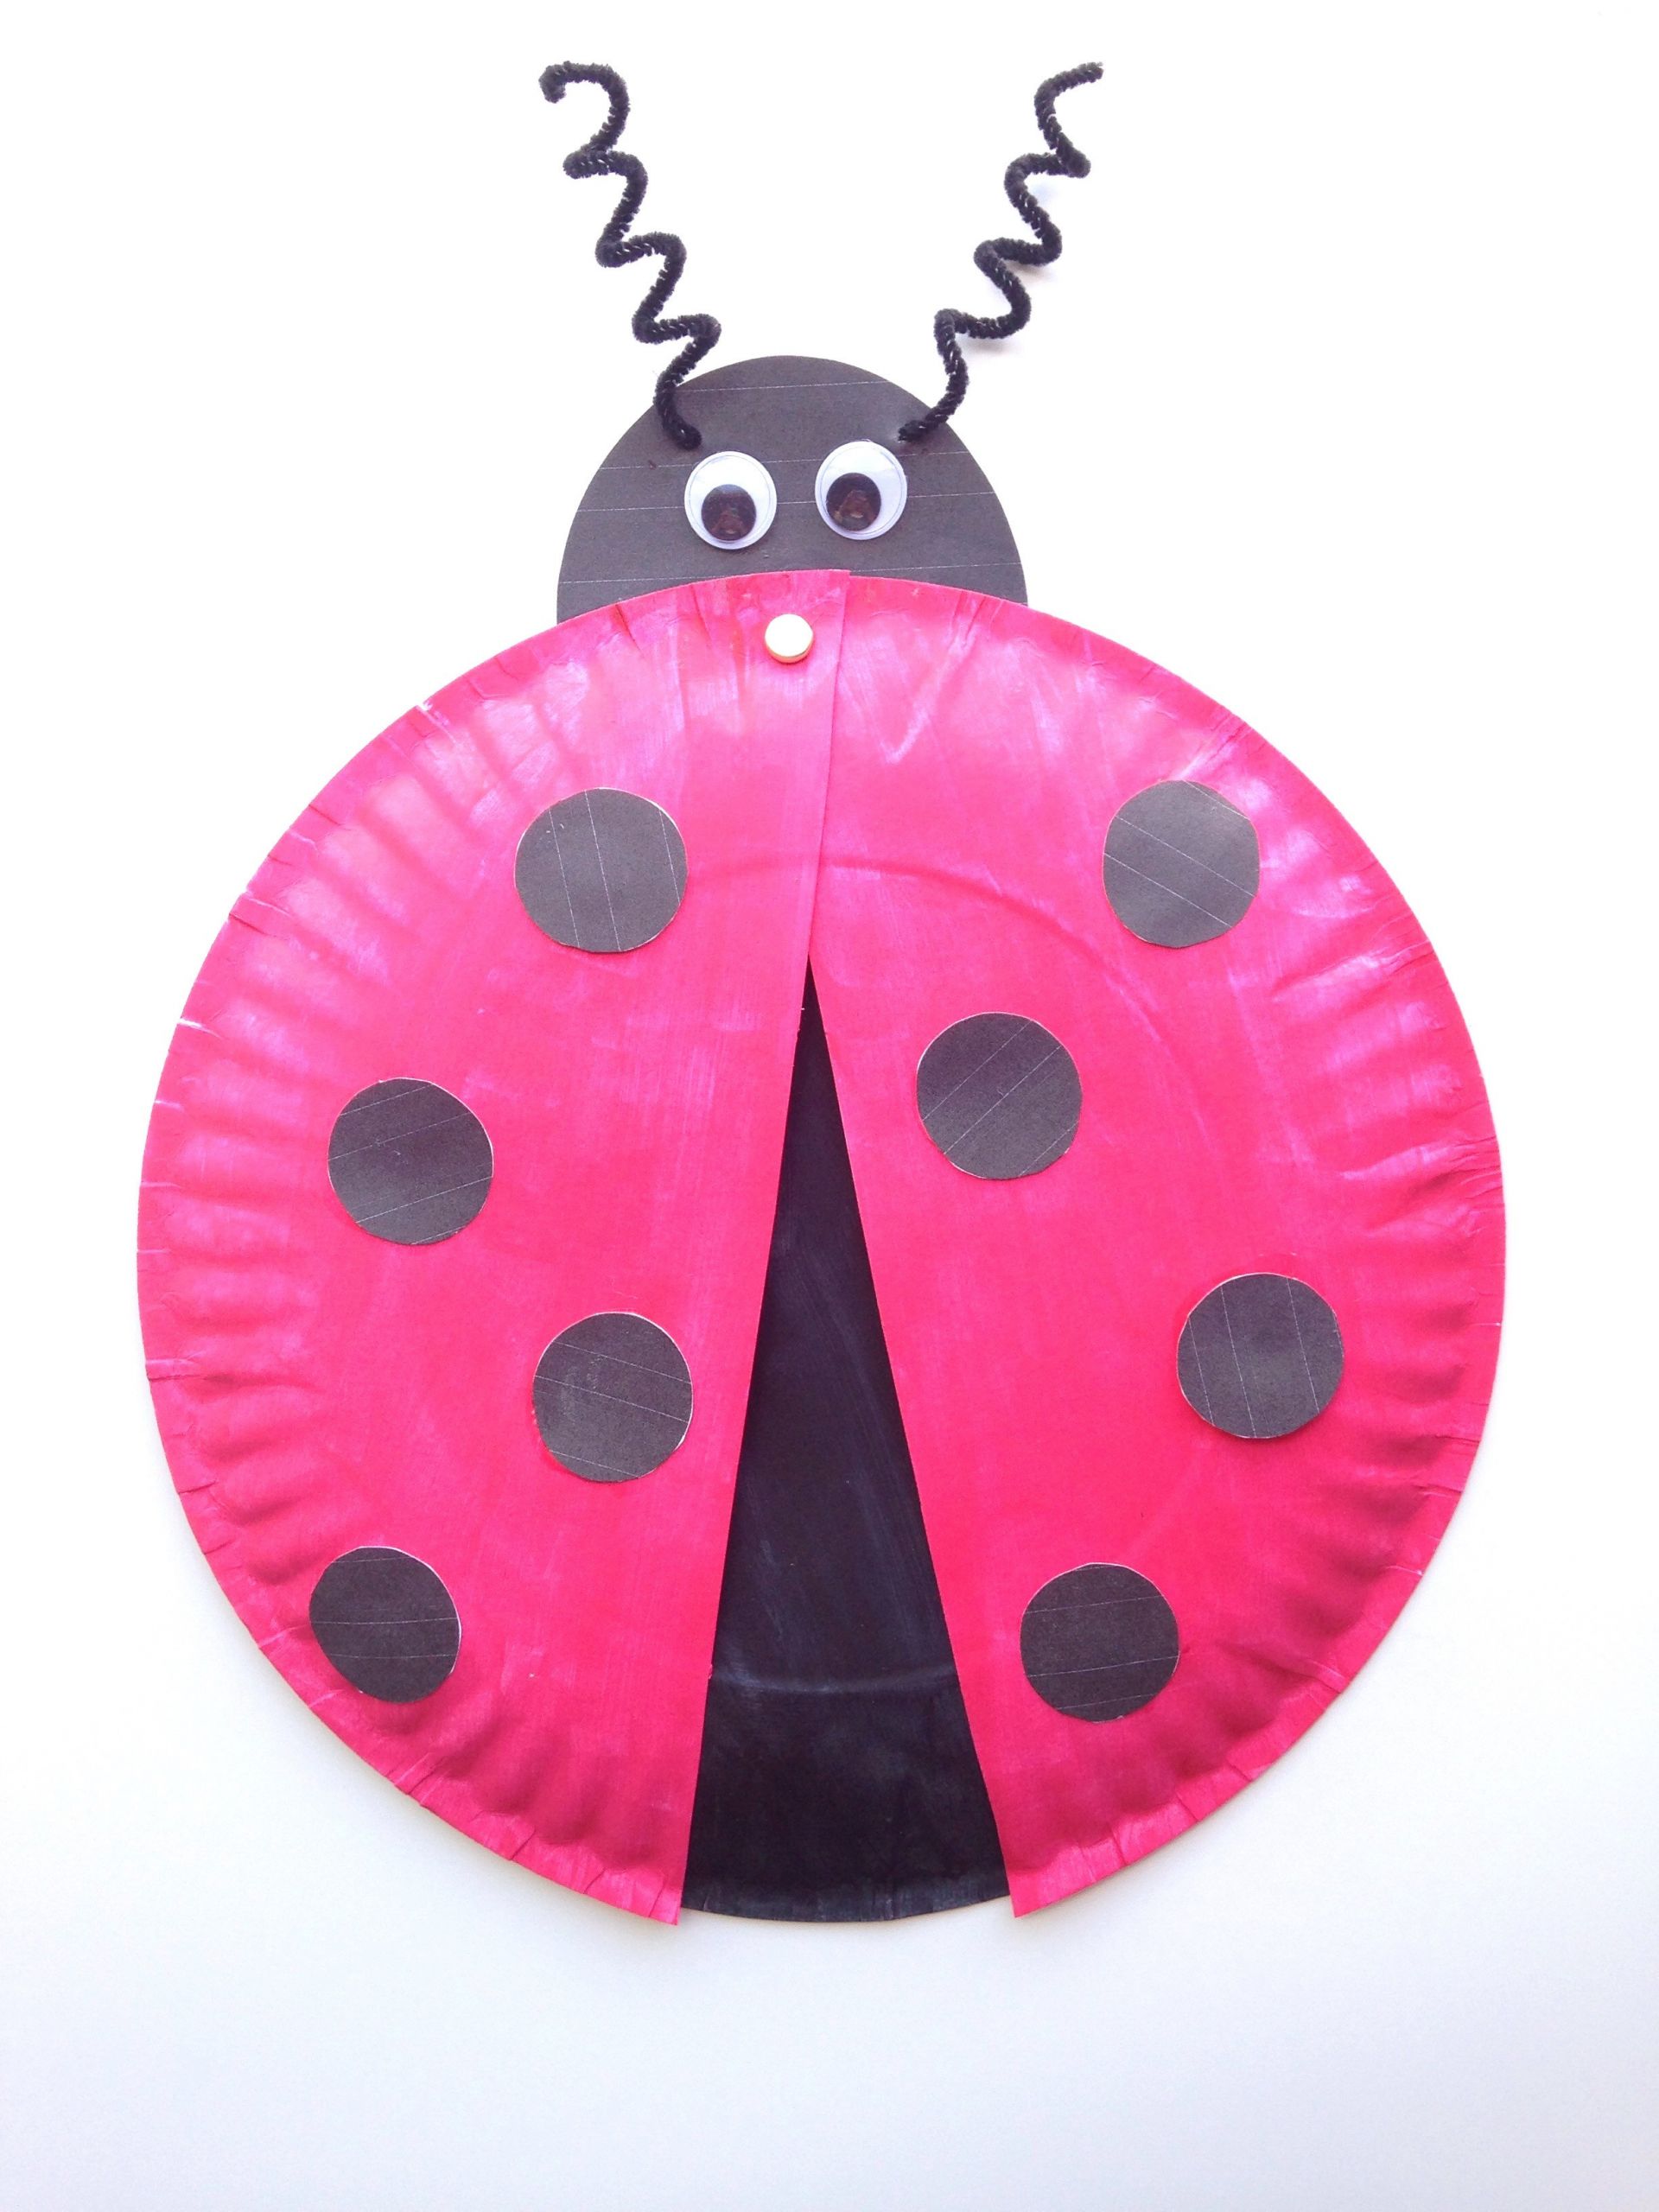 Printable Crafts For Toddlers
 Ladybug Paper Plate Craft for Kids Free Printable